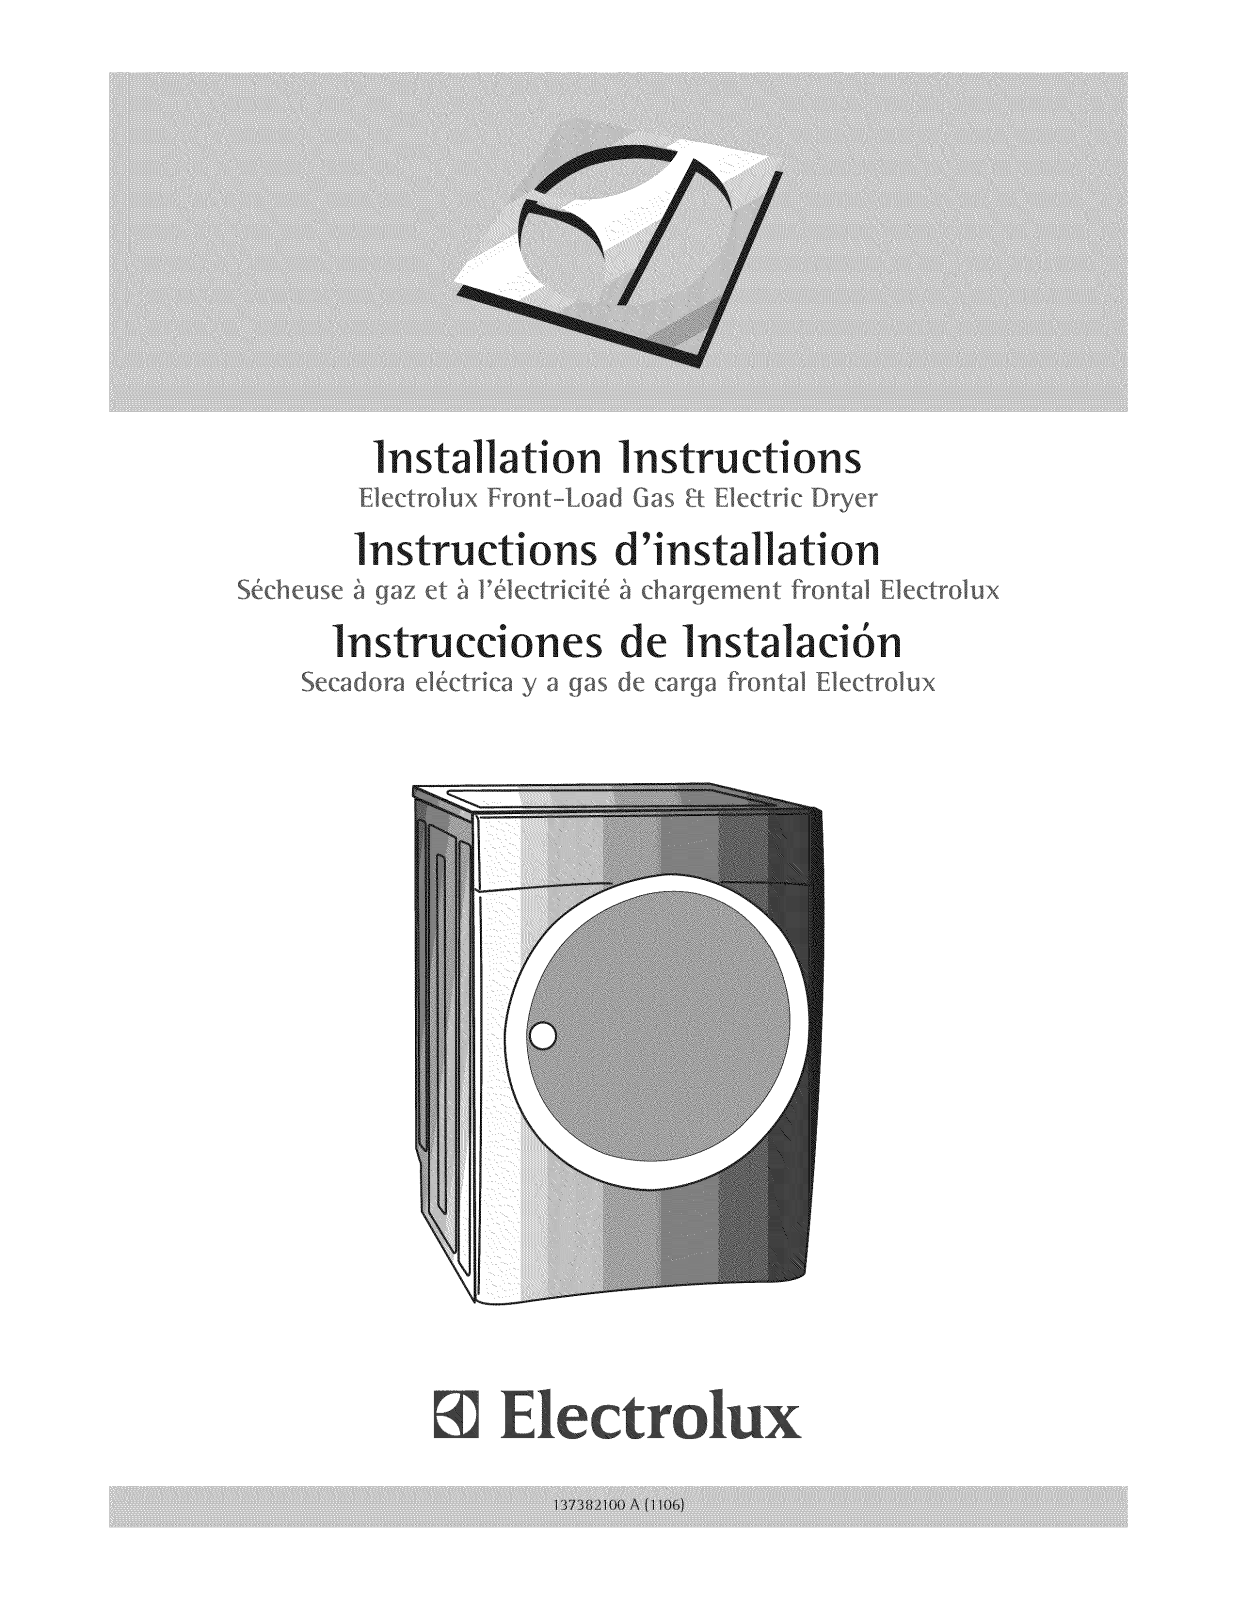 Electrolux EIED50LIW0, EIED50LIW1, EIED50LIW2, EIGD50LIW0, EIMED55IIW1 Installation Guide